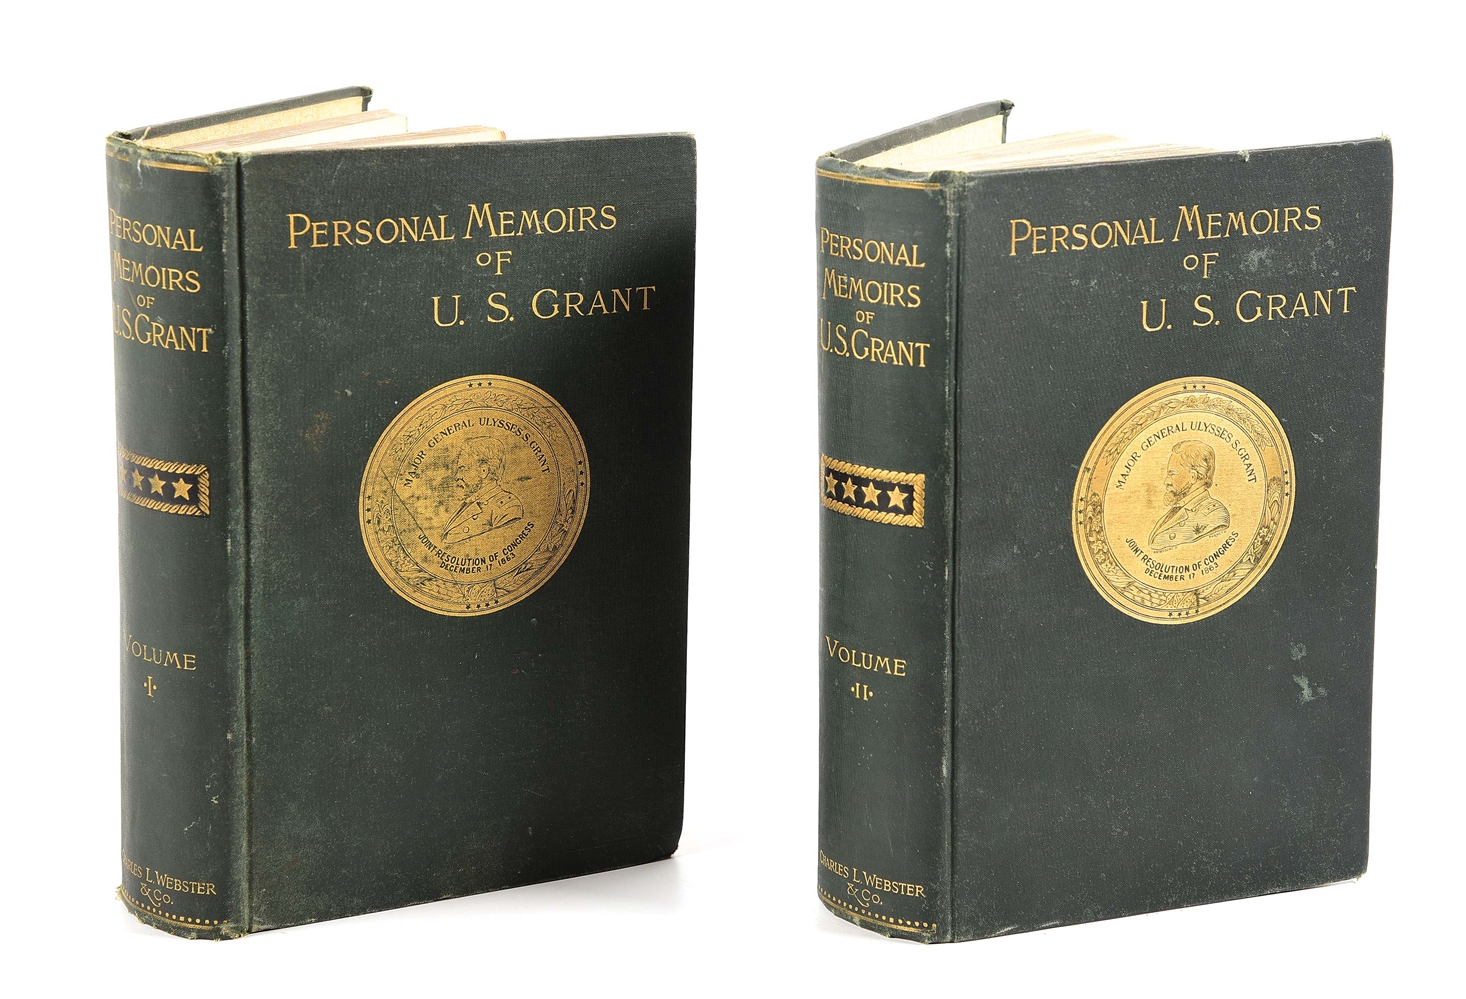 PERSONAL MEMOIRS OF U.S. GRANT, FIRST EDITION SET.